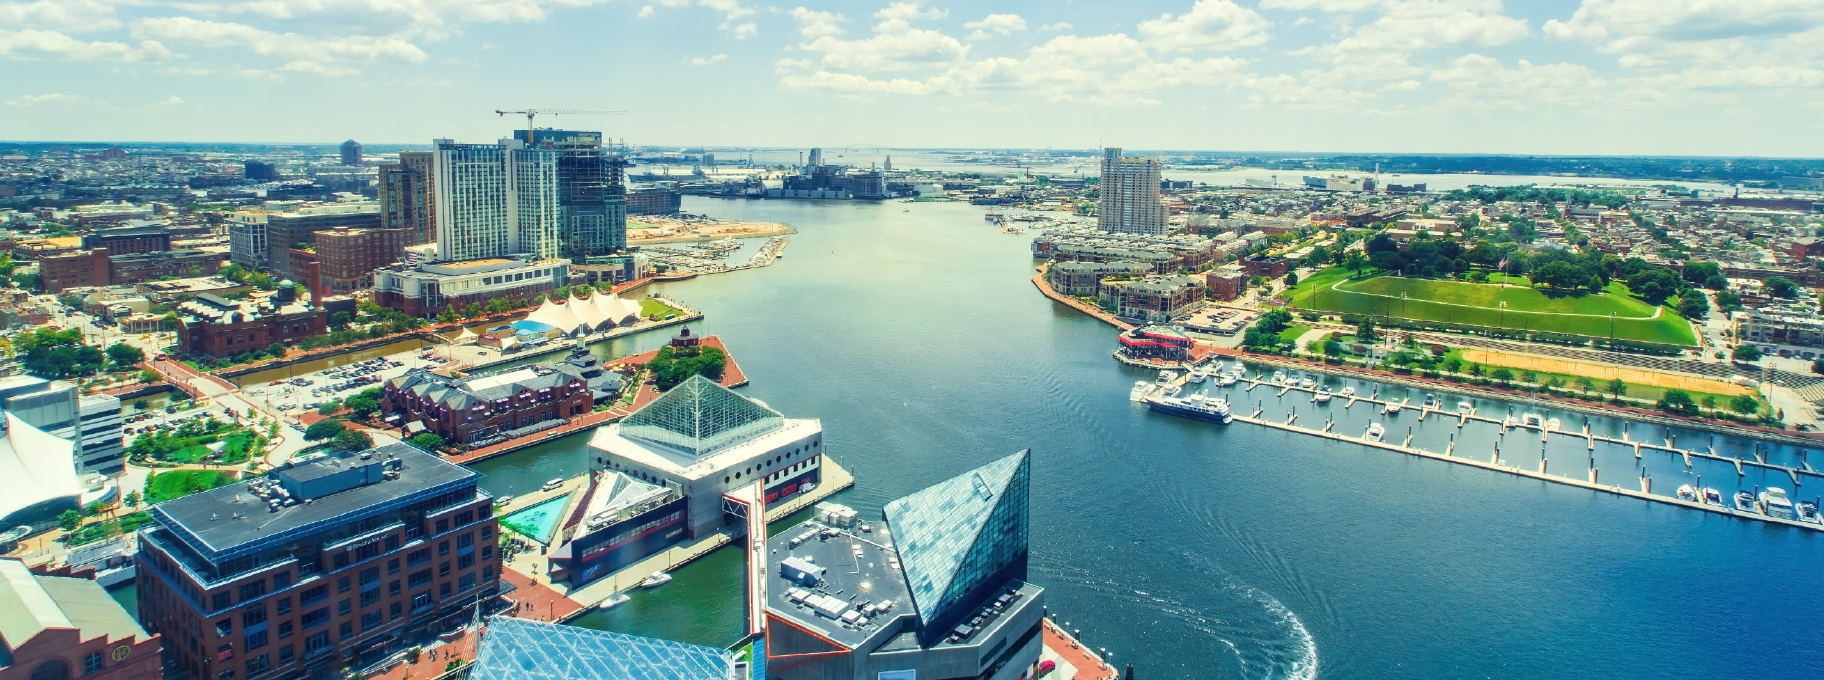 An aerial view of Baltimore's inner harbor